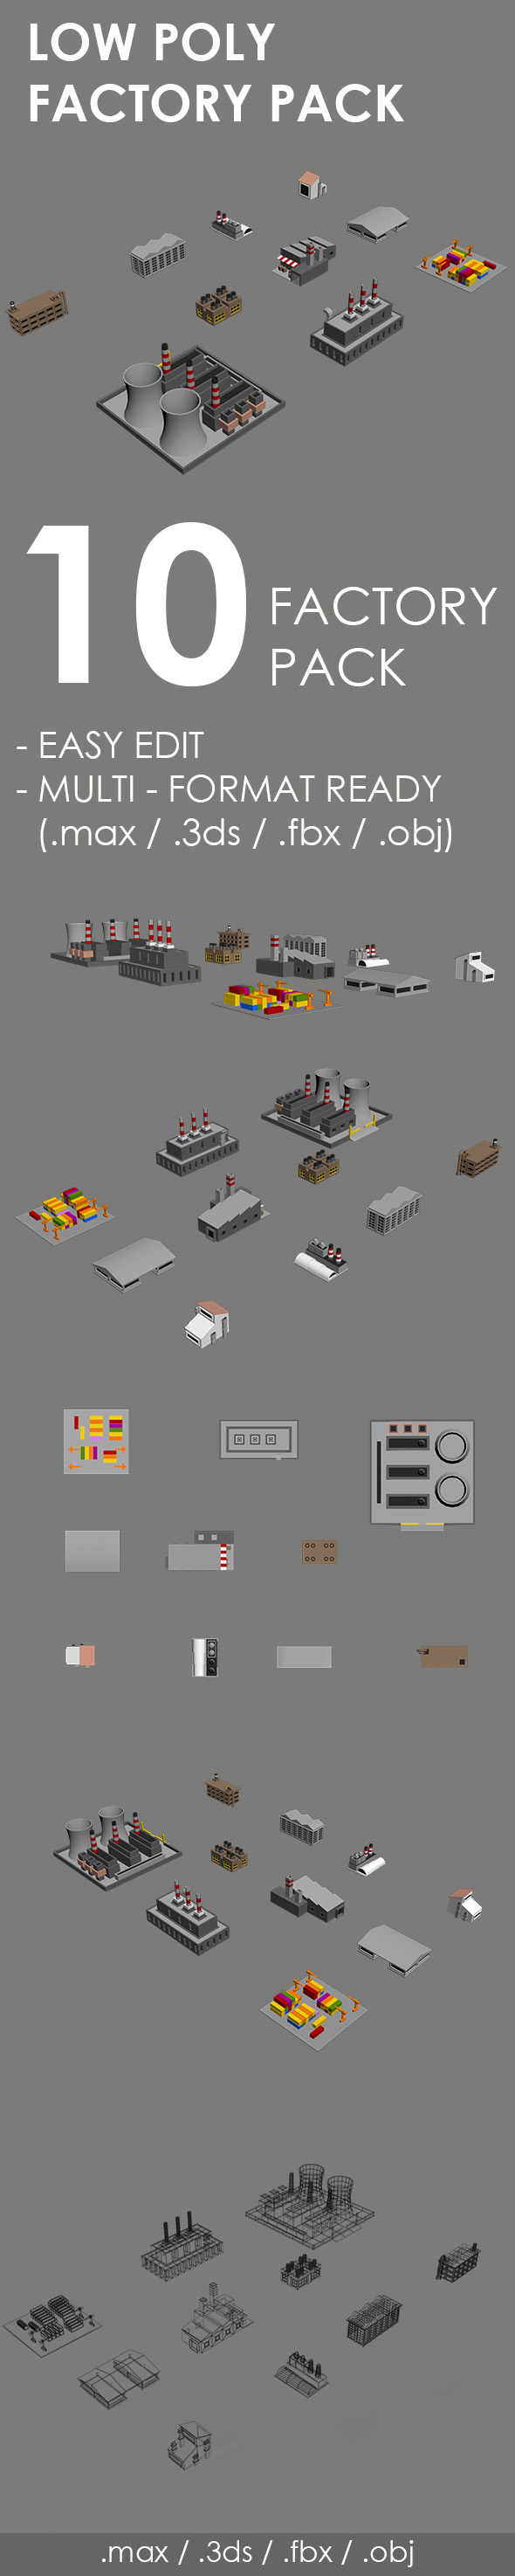 Low Poly Factory - 3Docean 30311641